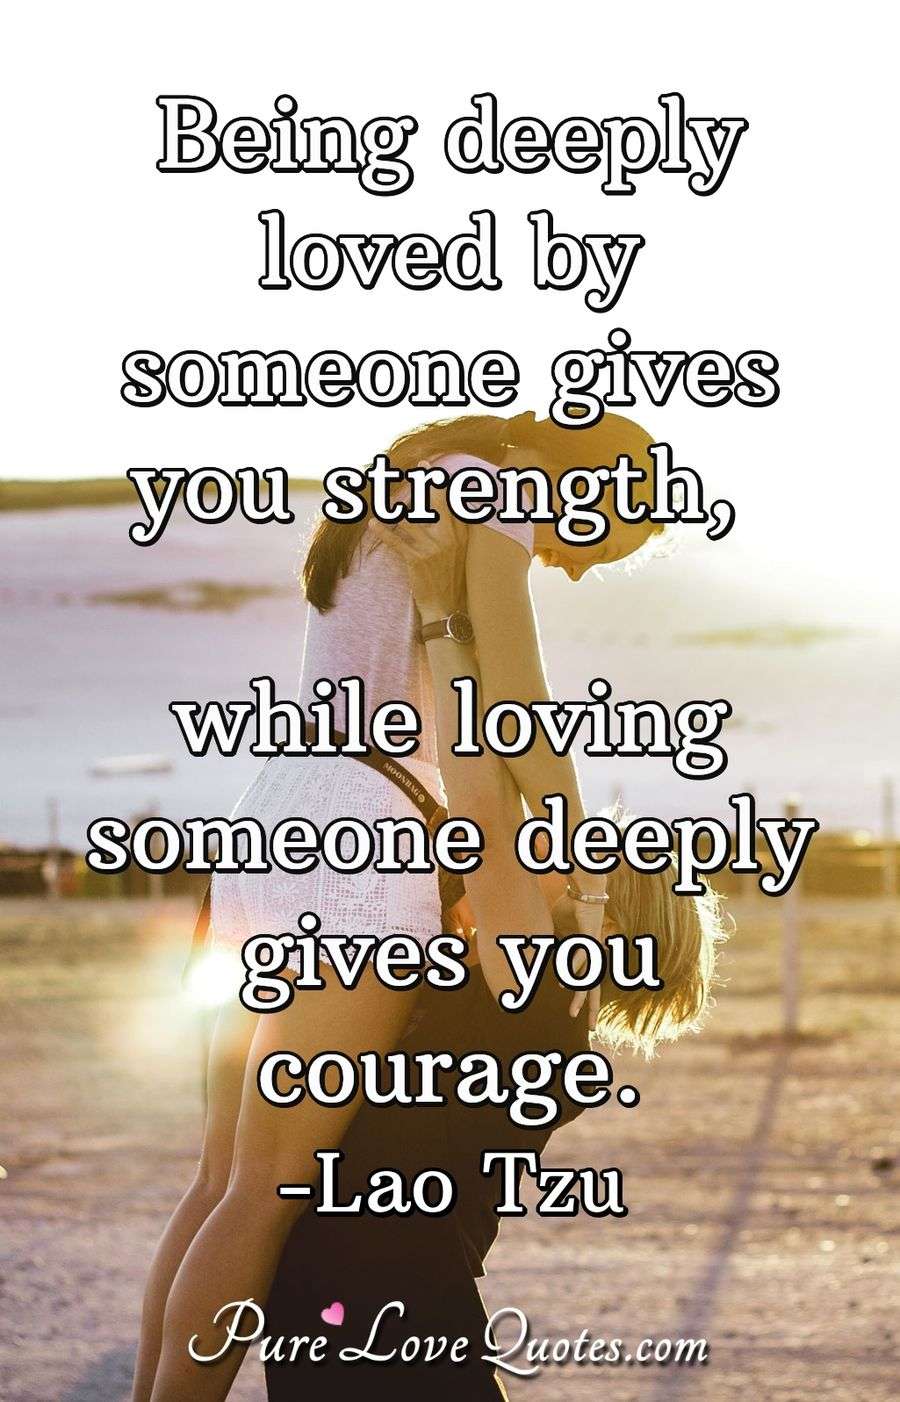 Being deeply loved by someone gives you strength, while loving someone ...